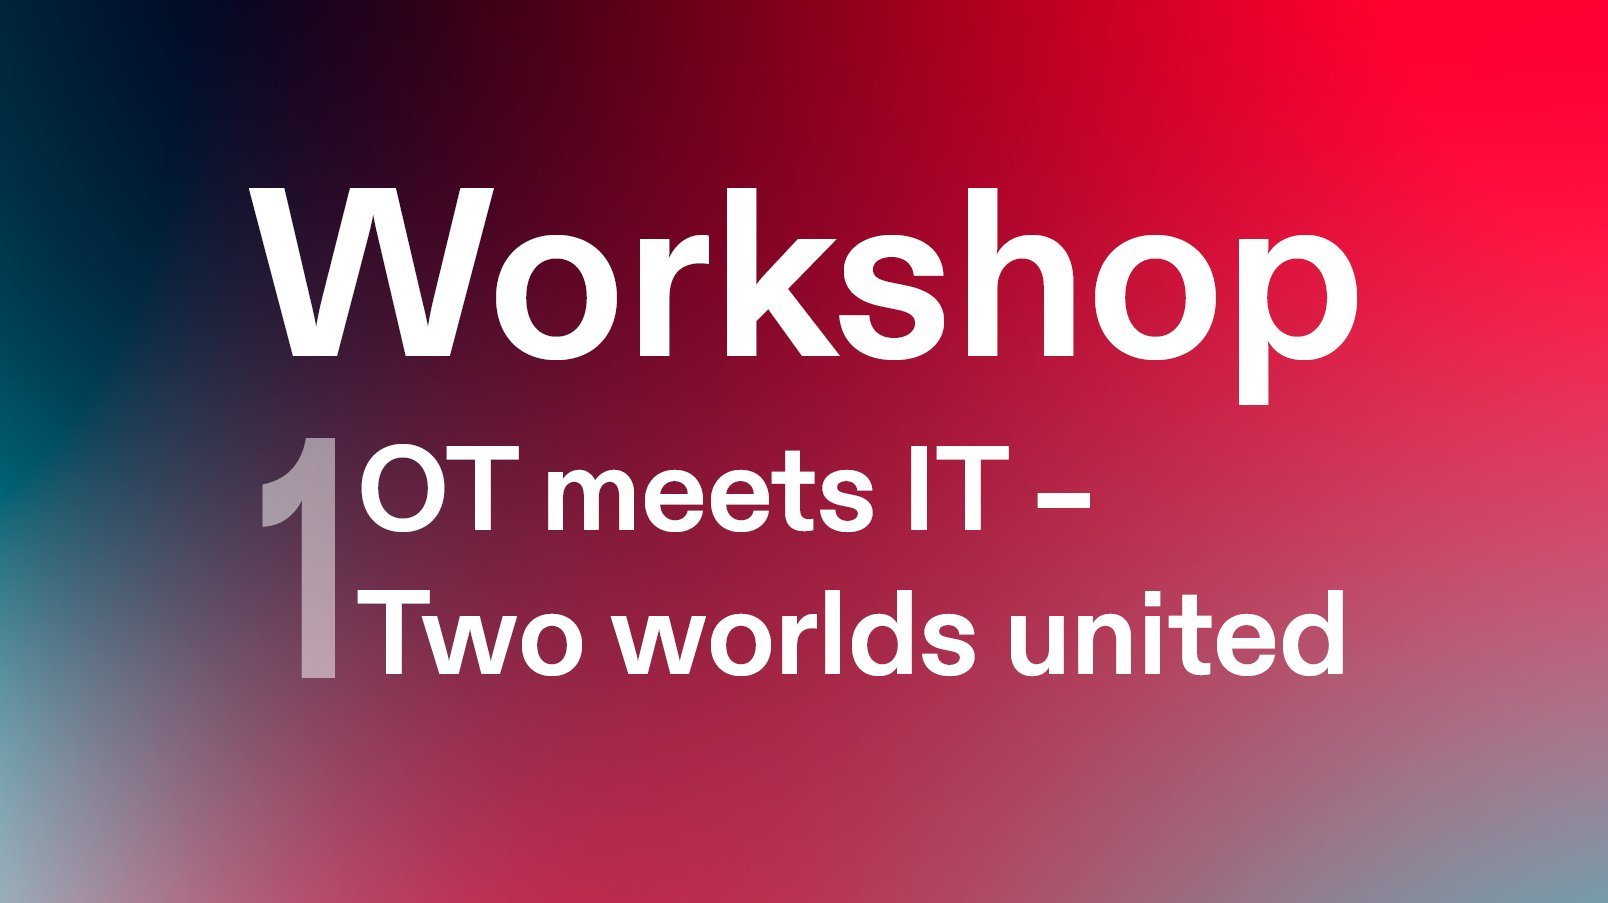 Banner of the IIoT Workshop OT meets IT on colorful background in French.